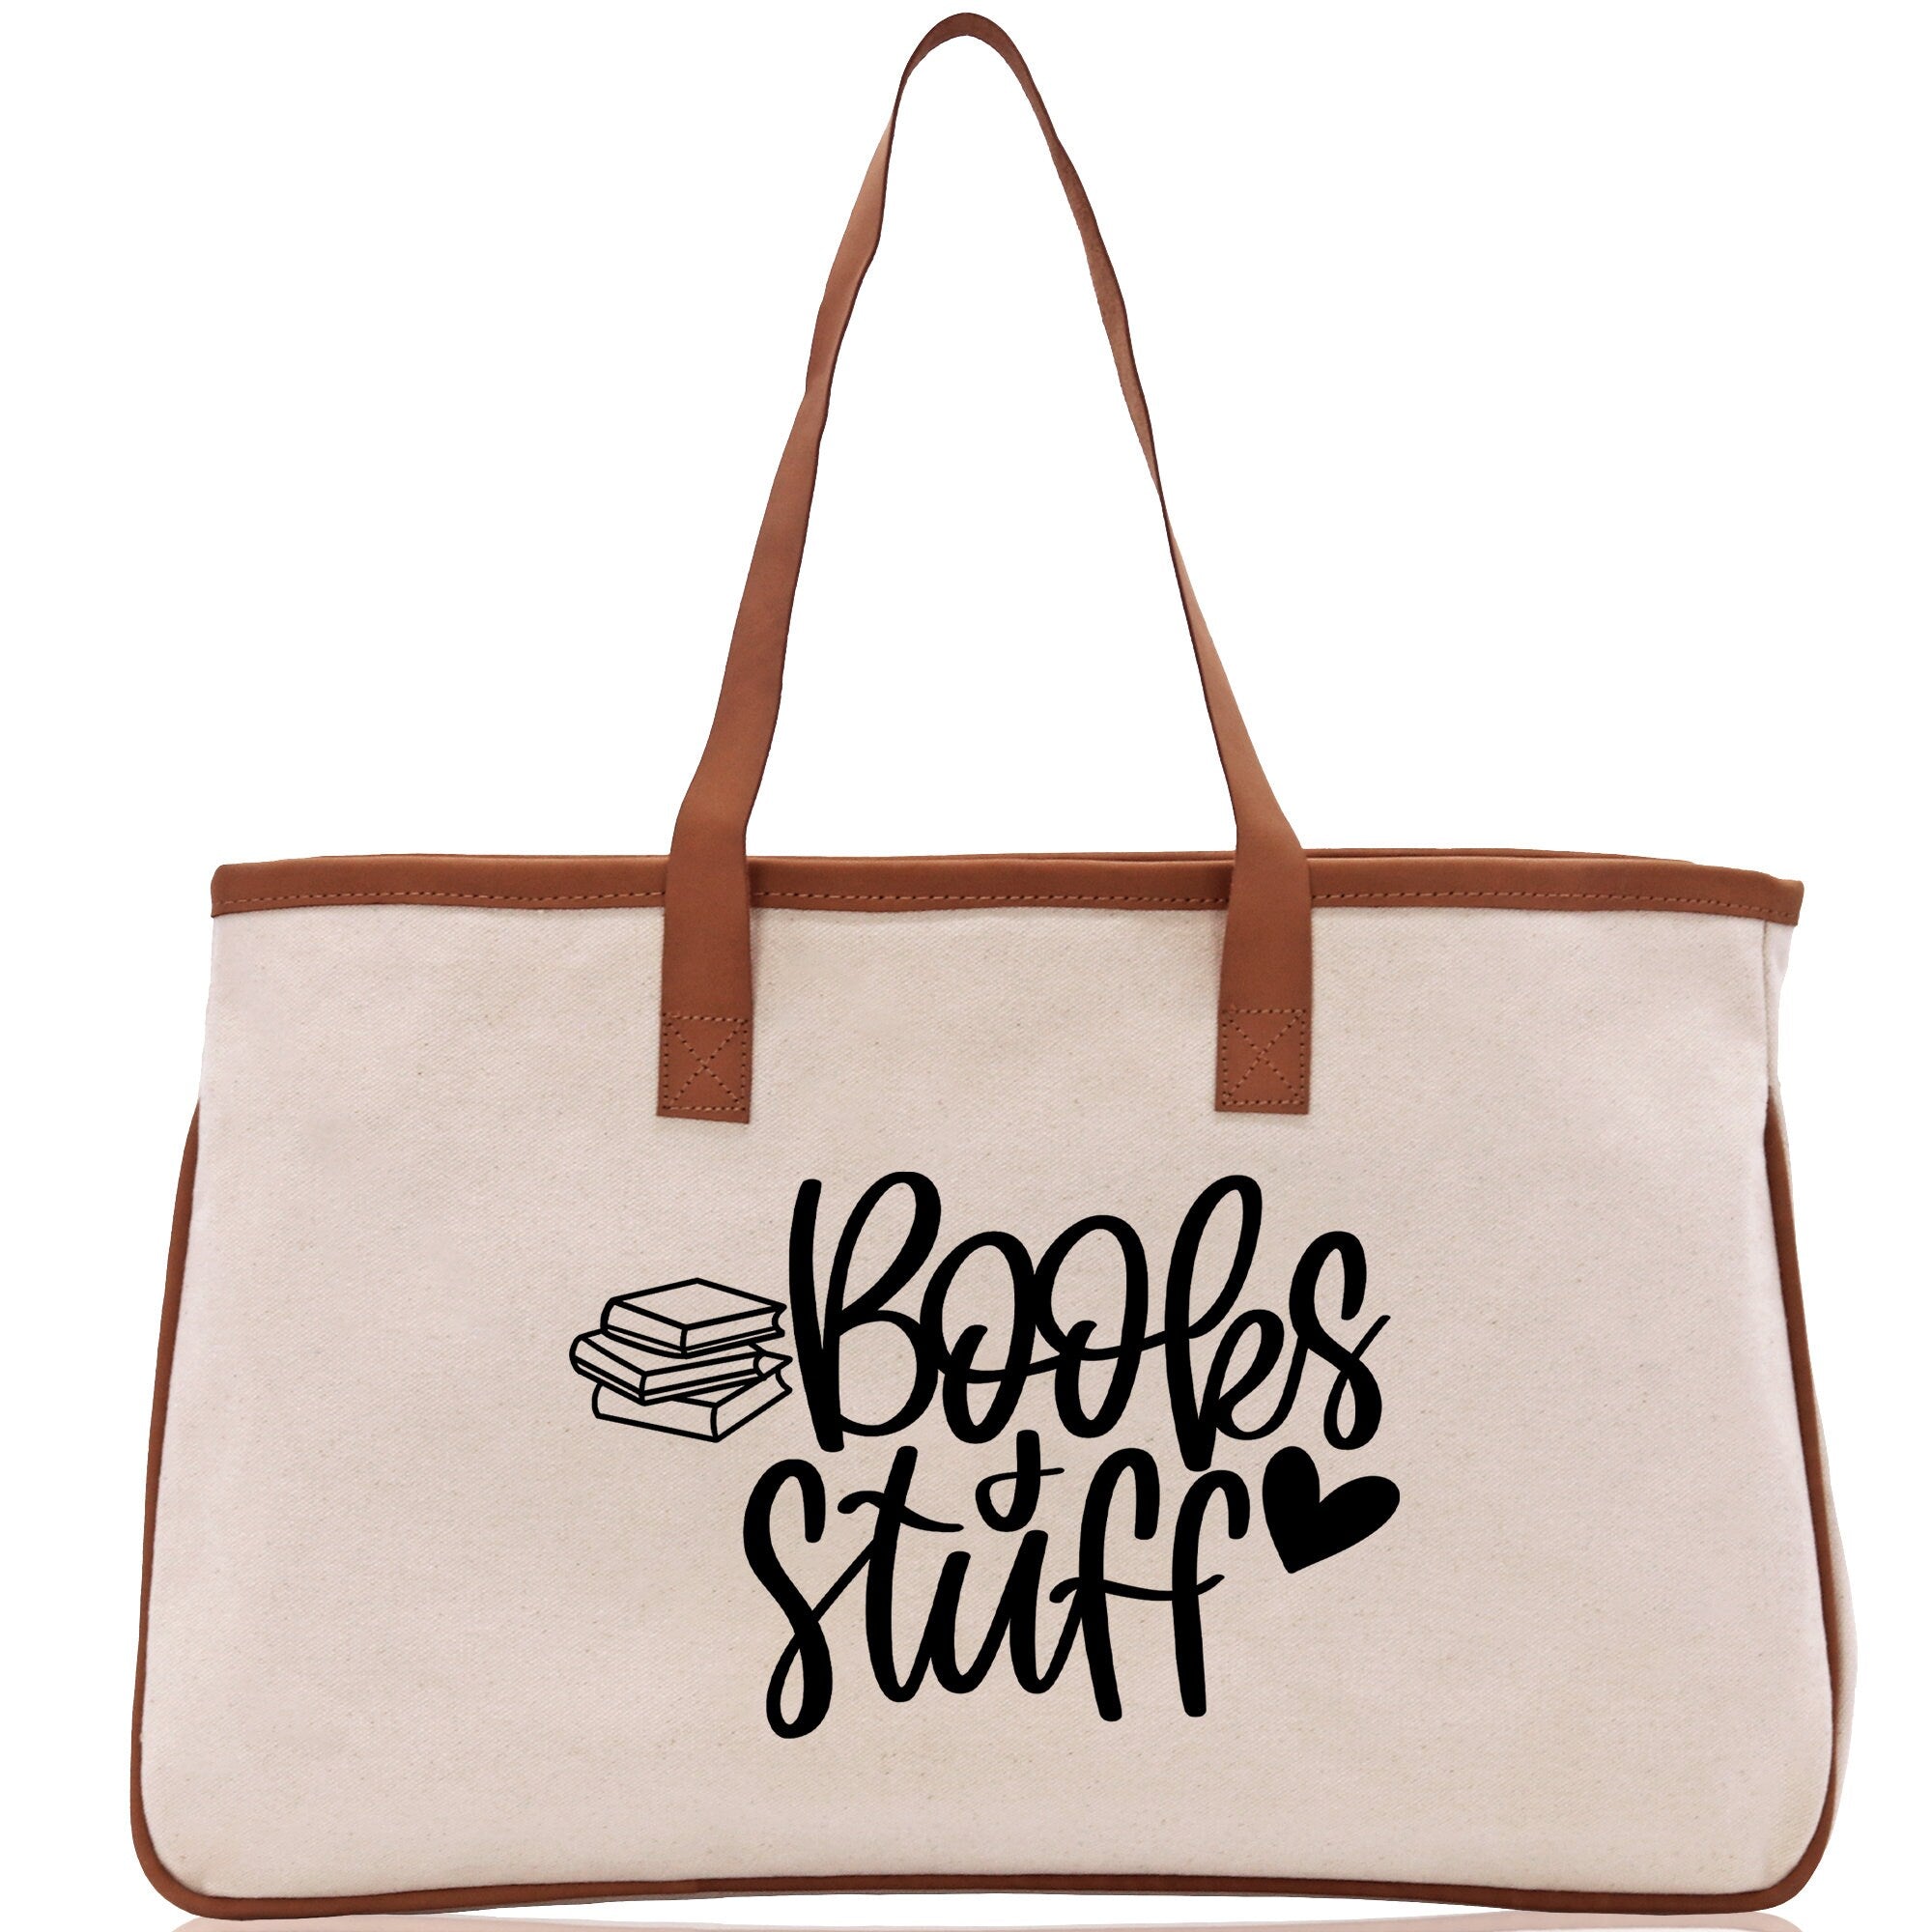 Books Stuff Tote Bag Bookworm Gift Book Quotes Party Gift Book Lover Tote Book Canvas Tote Bag Birthday Gift Library Bag Grocery Bag